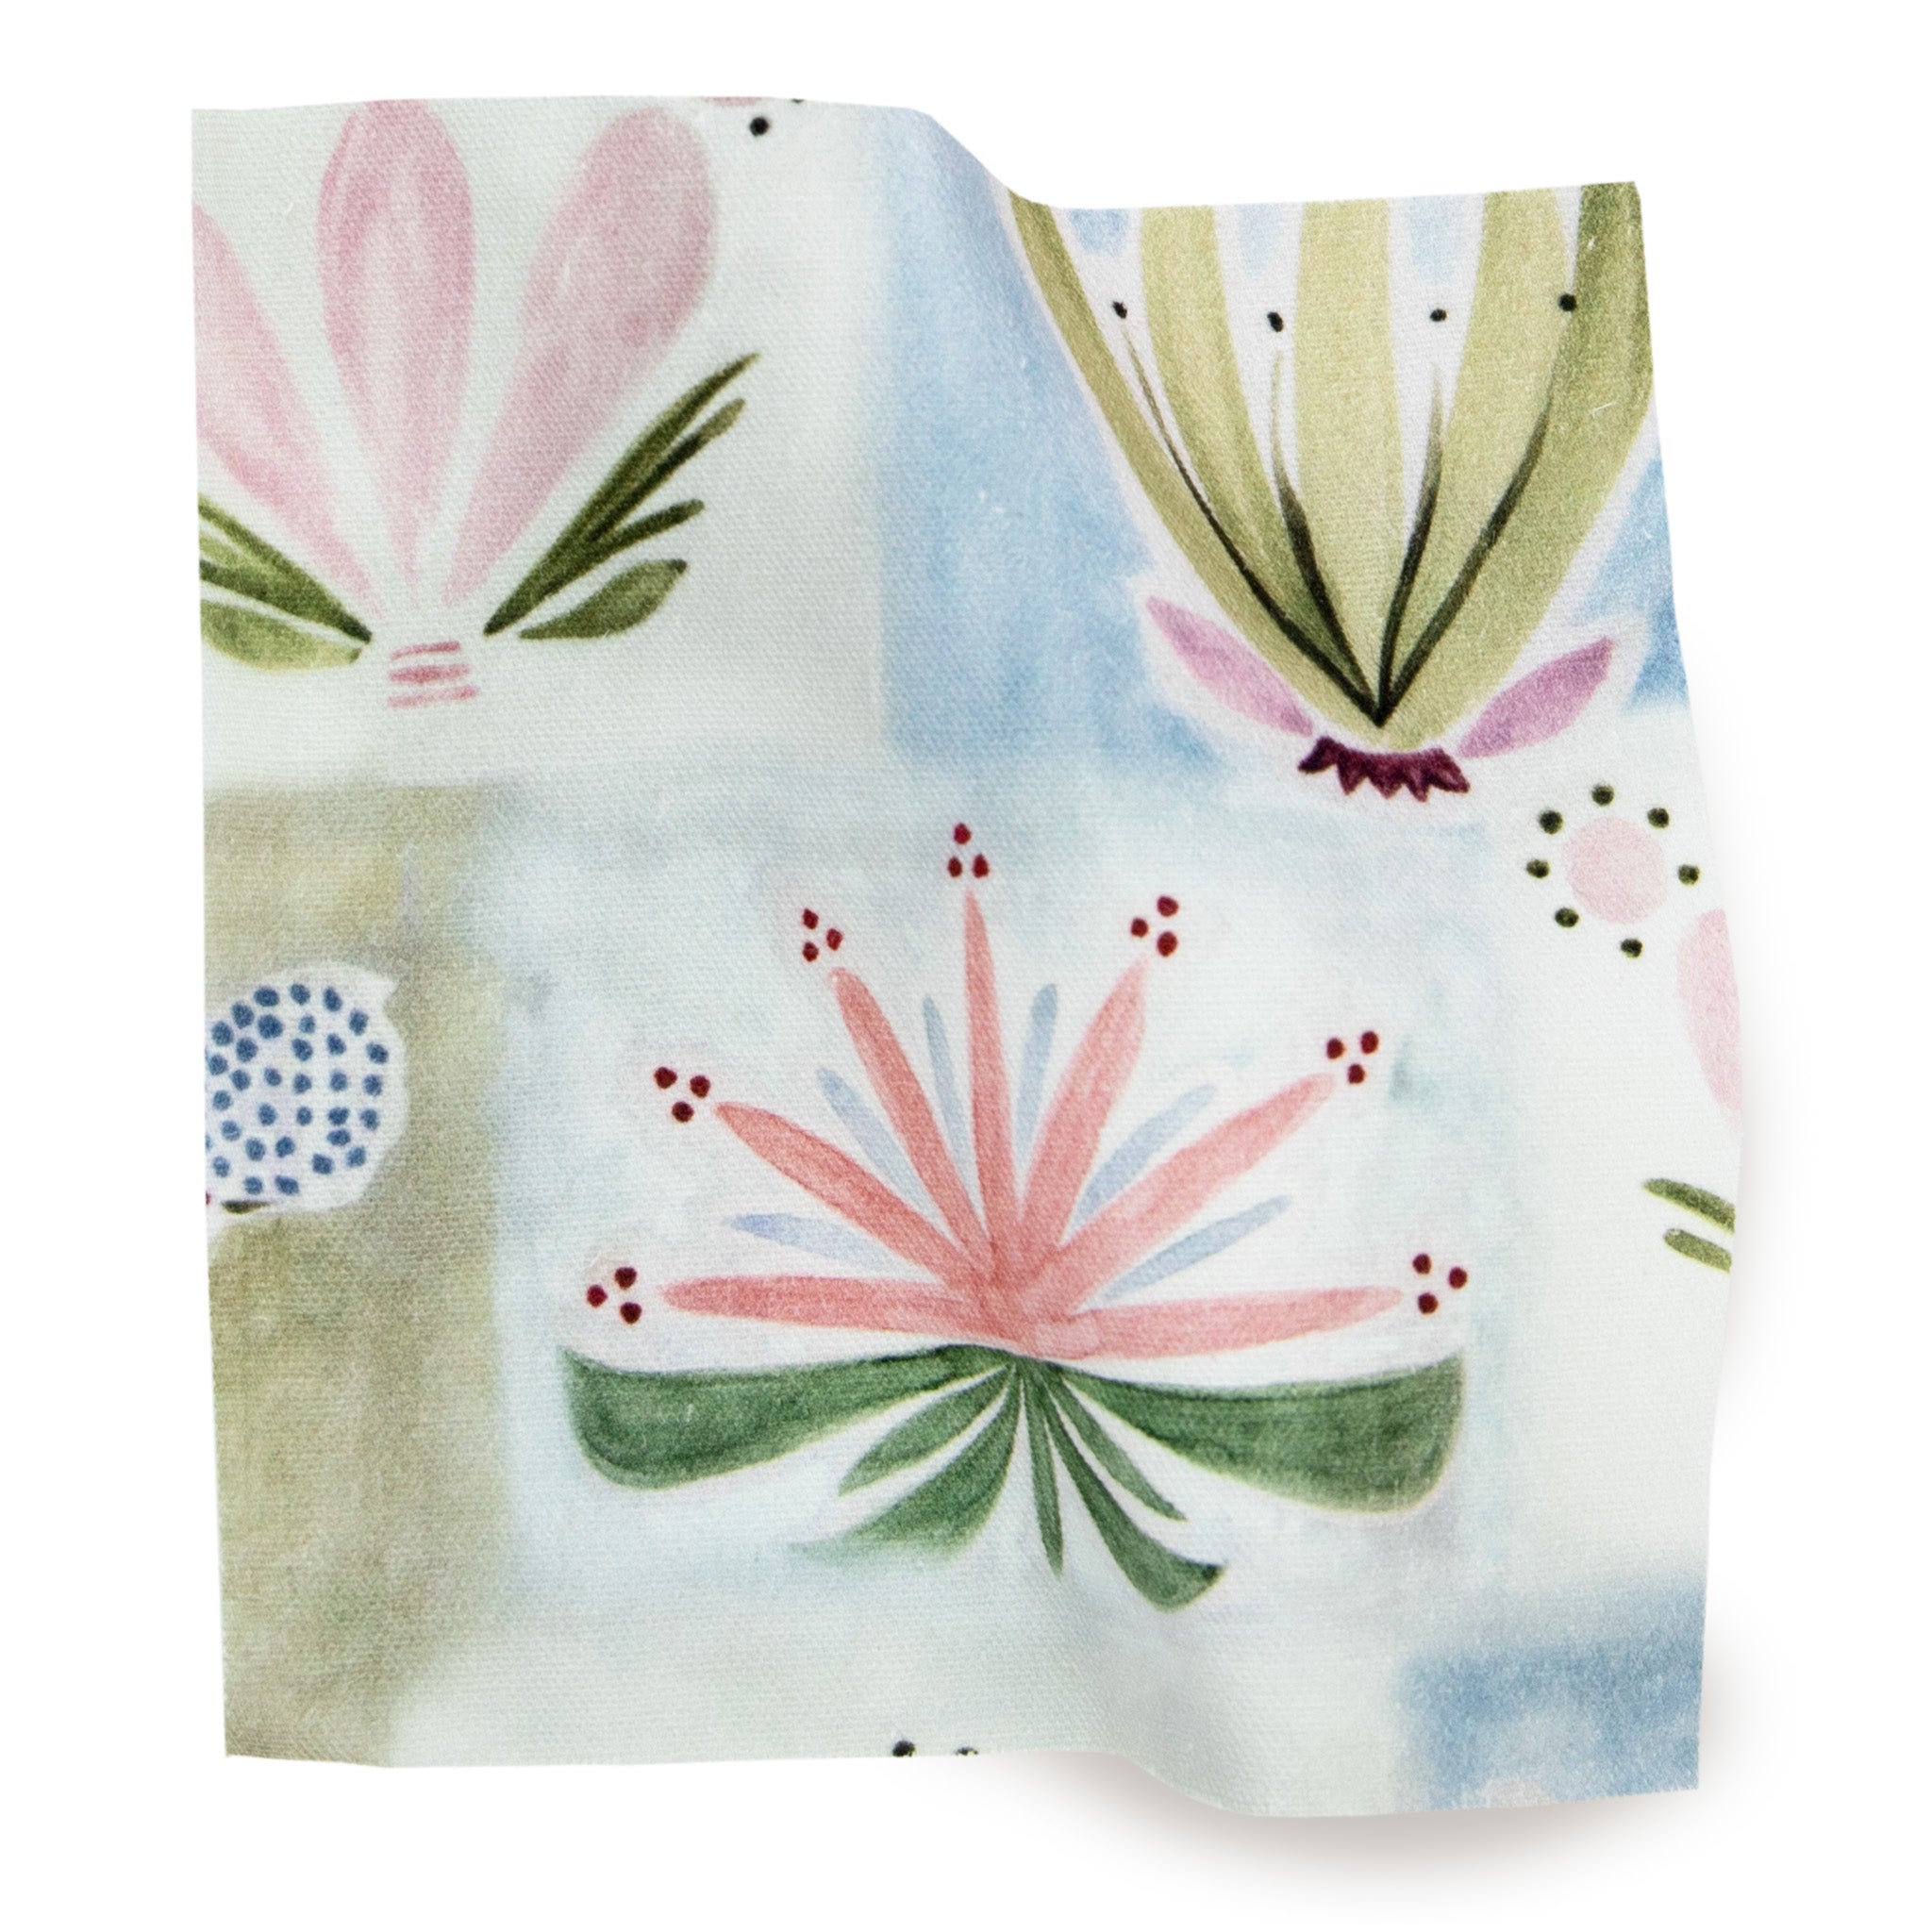 Hand-painted Floral Printed Cotton Swatch